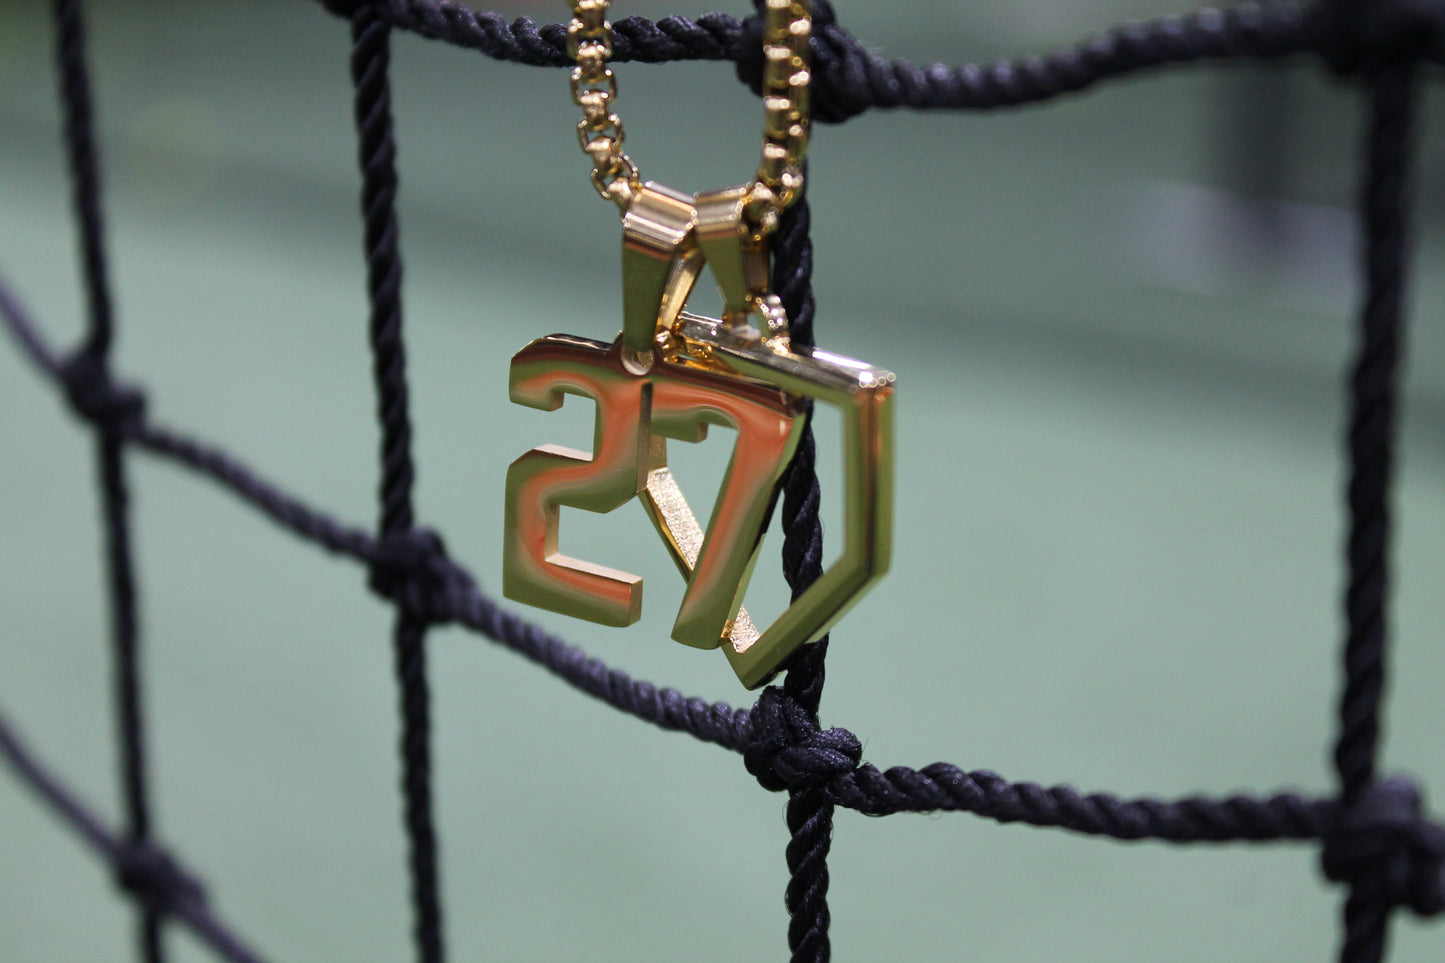 Number Pendant 51-99 GOLD w/Chain